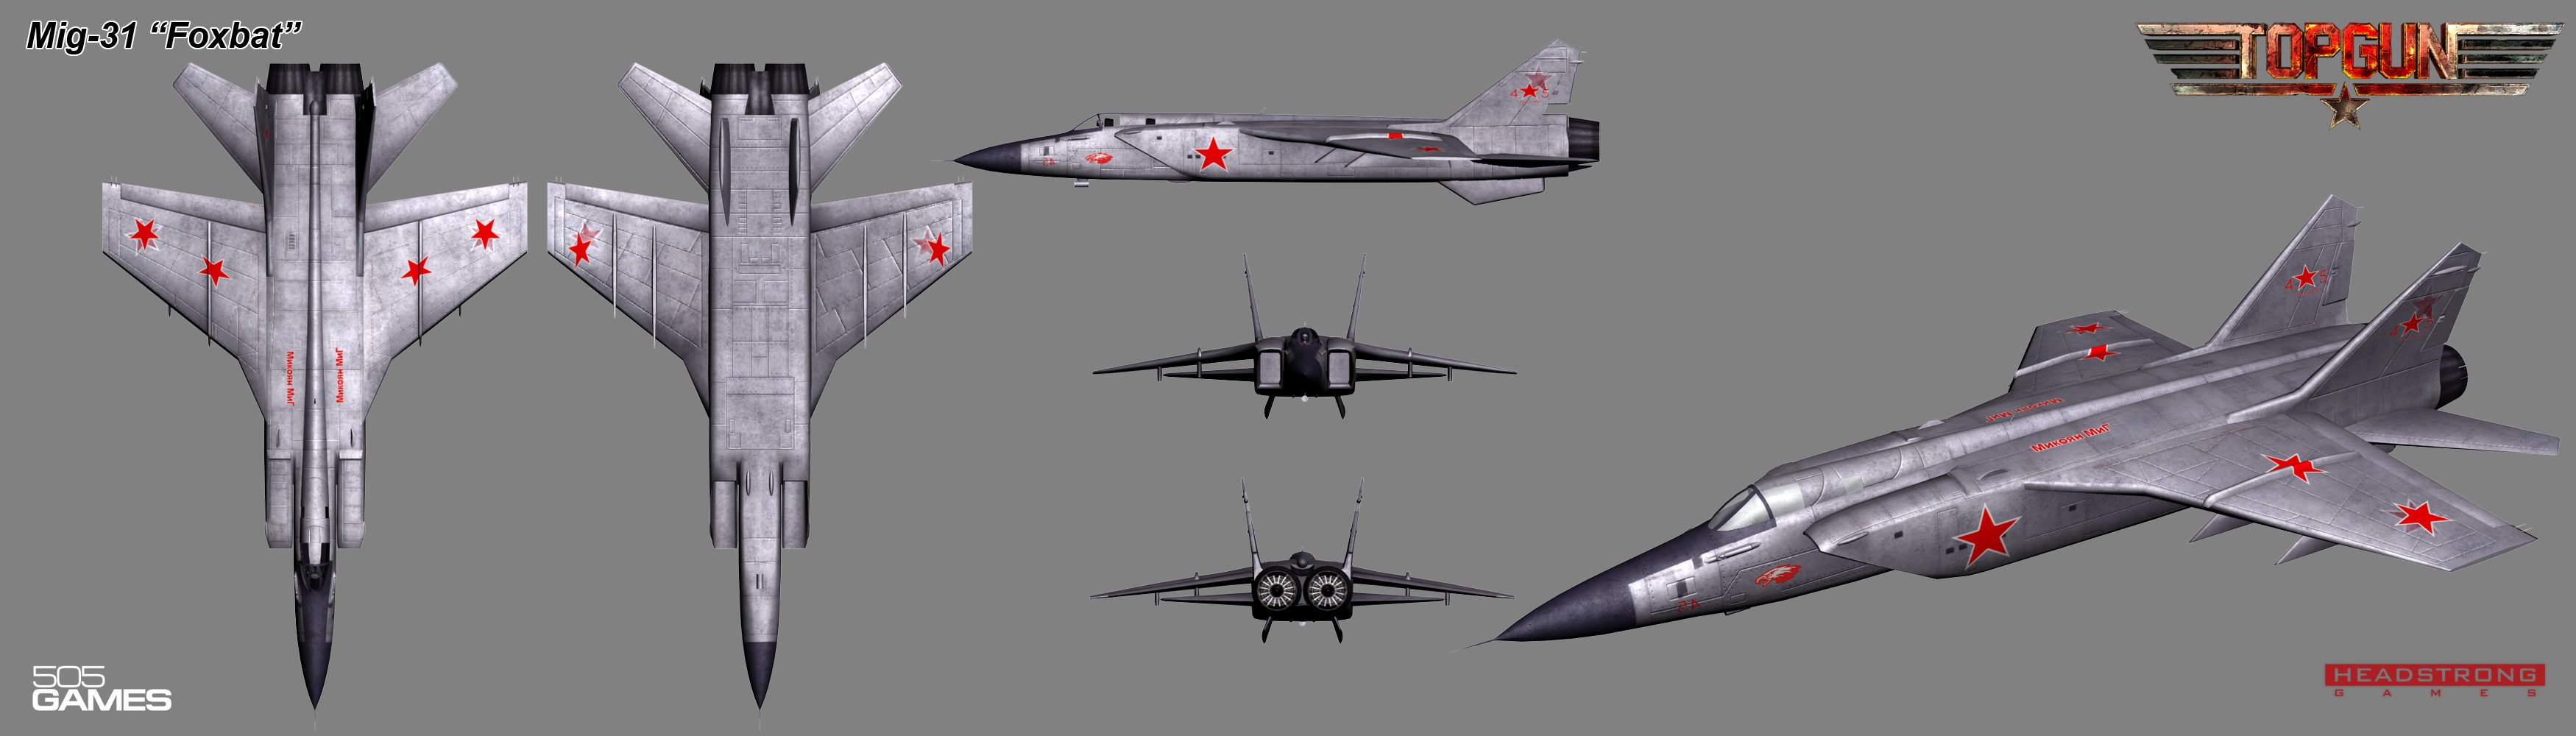 mig 31, Fighter, Jet, Military, Airplane, Plane, Russian, Mig,  6 Wallpaper